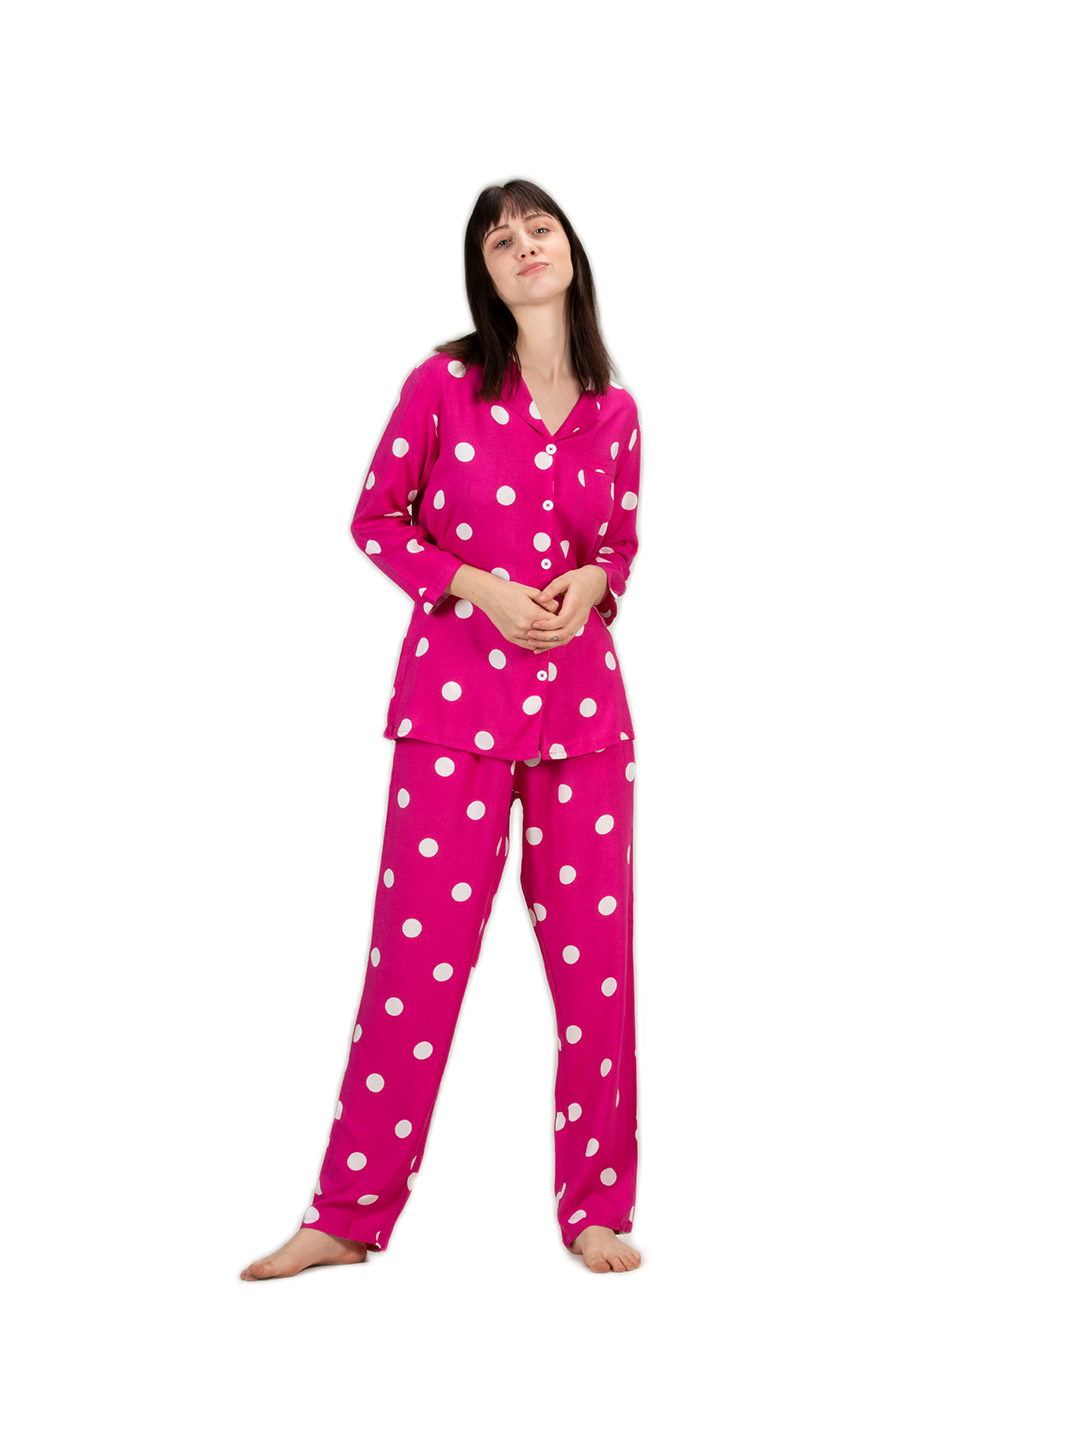 Evolove Women Pyjamas Top Pants Set for Daily Use Winter Night Wear with Pockets Buttons Elastic Waist Viscose Liva Super Soft Comfortable ( S to 2XL Size )